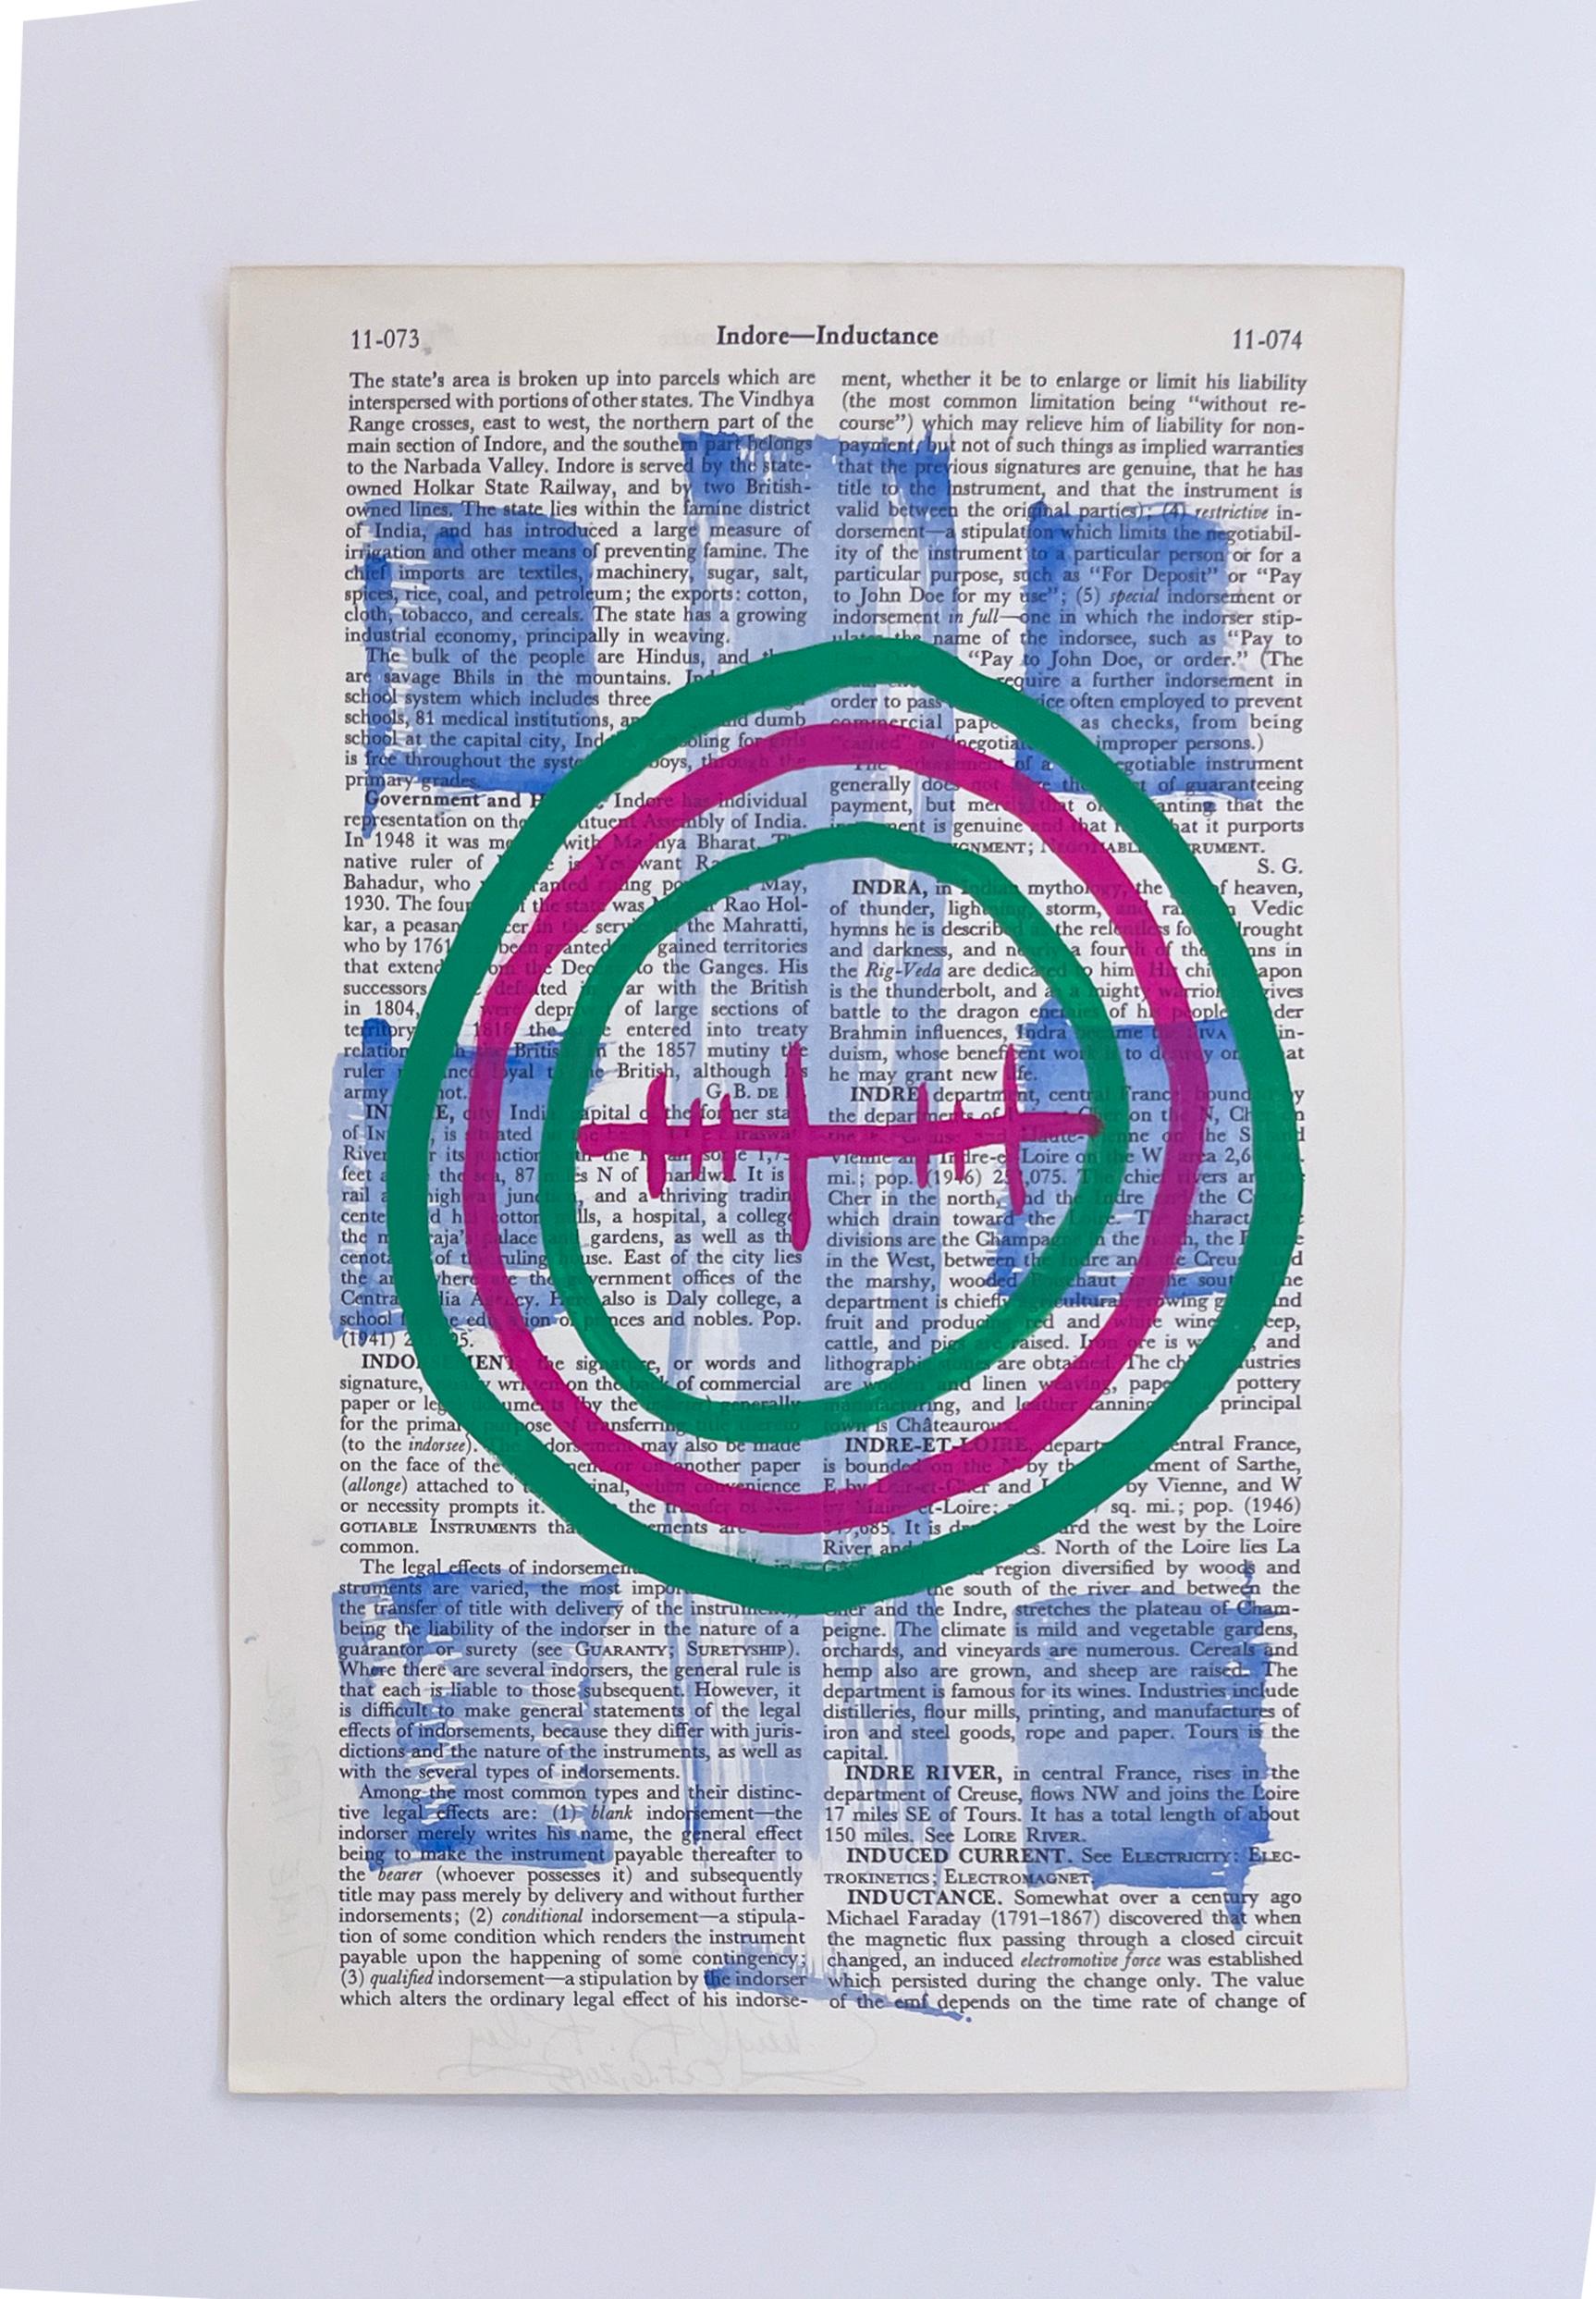 Time Travel

Gouache on 1957 Encyclopedia page

Feminist Art and Contemporary Feminist / Geometric Abstraction / Gestural Abstraction / Abstract Art / Minimalism and Contemporary Minimalist

Frame size 12.875 x 9.875 x 0.675